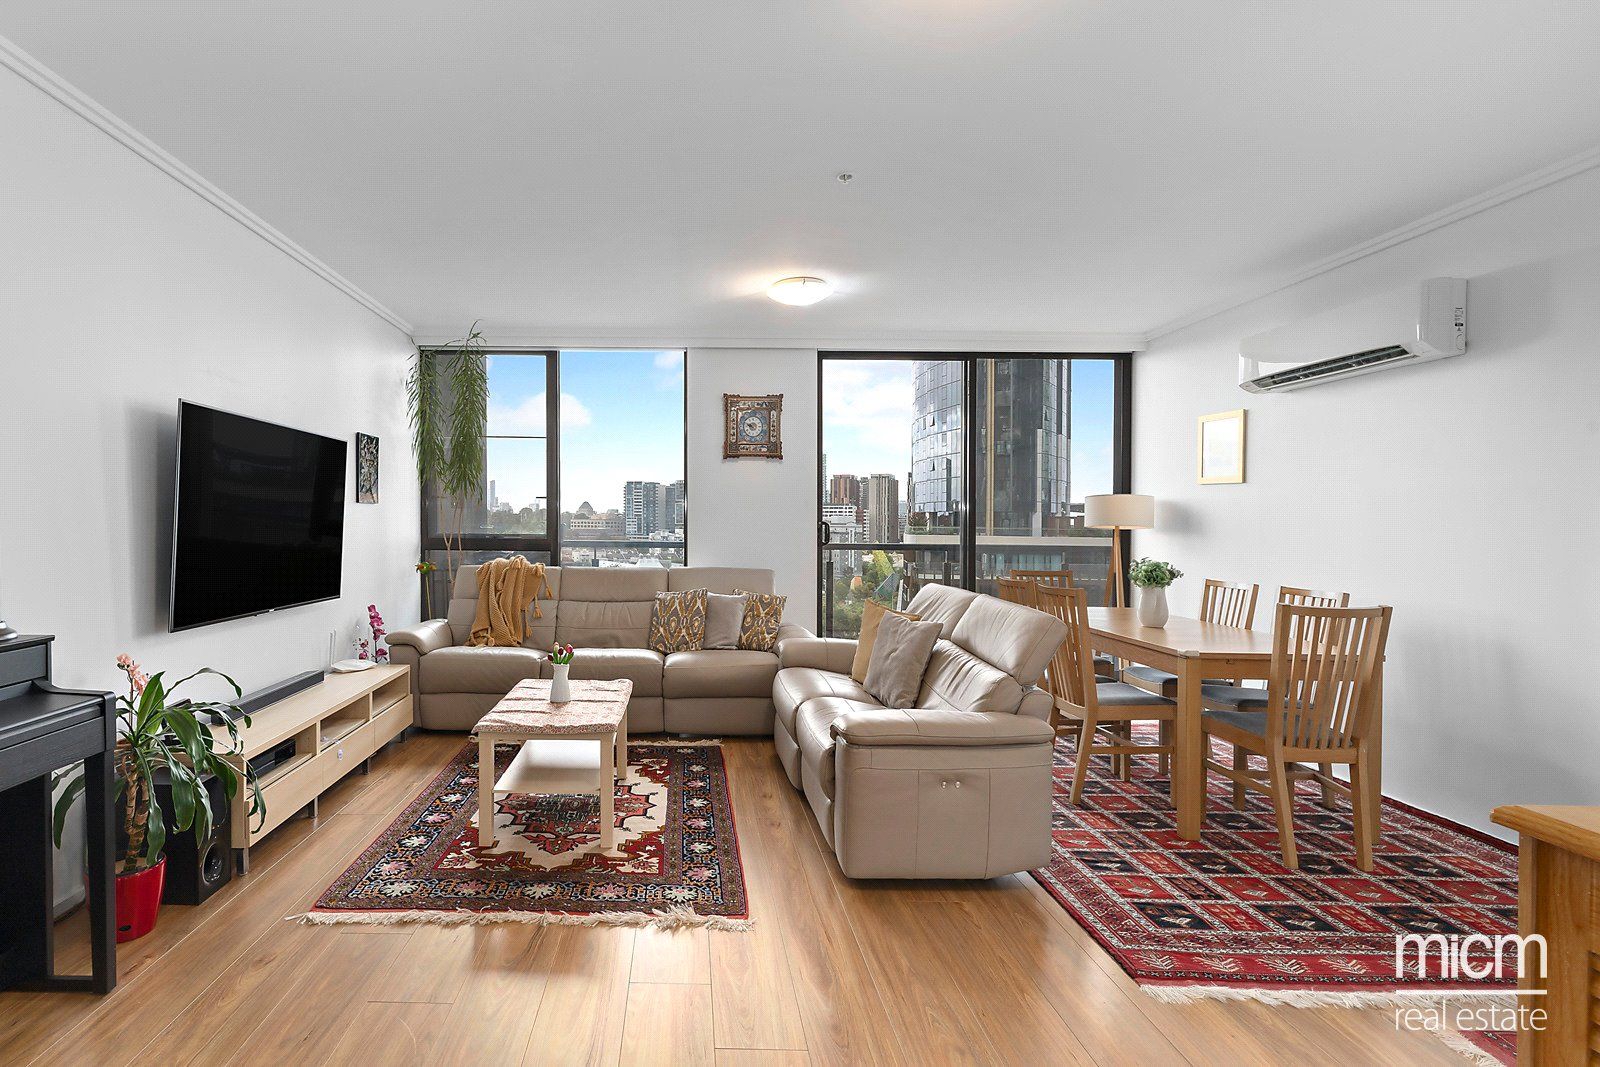 2 bedrooms Apartment / Unit / Flat in 117/88 Kavanagh Street SOUTHBANK VIC, 3006